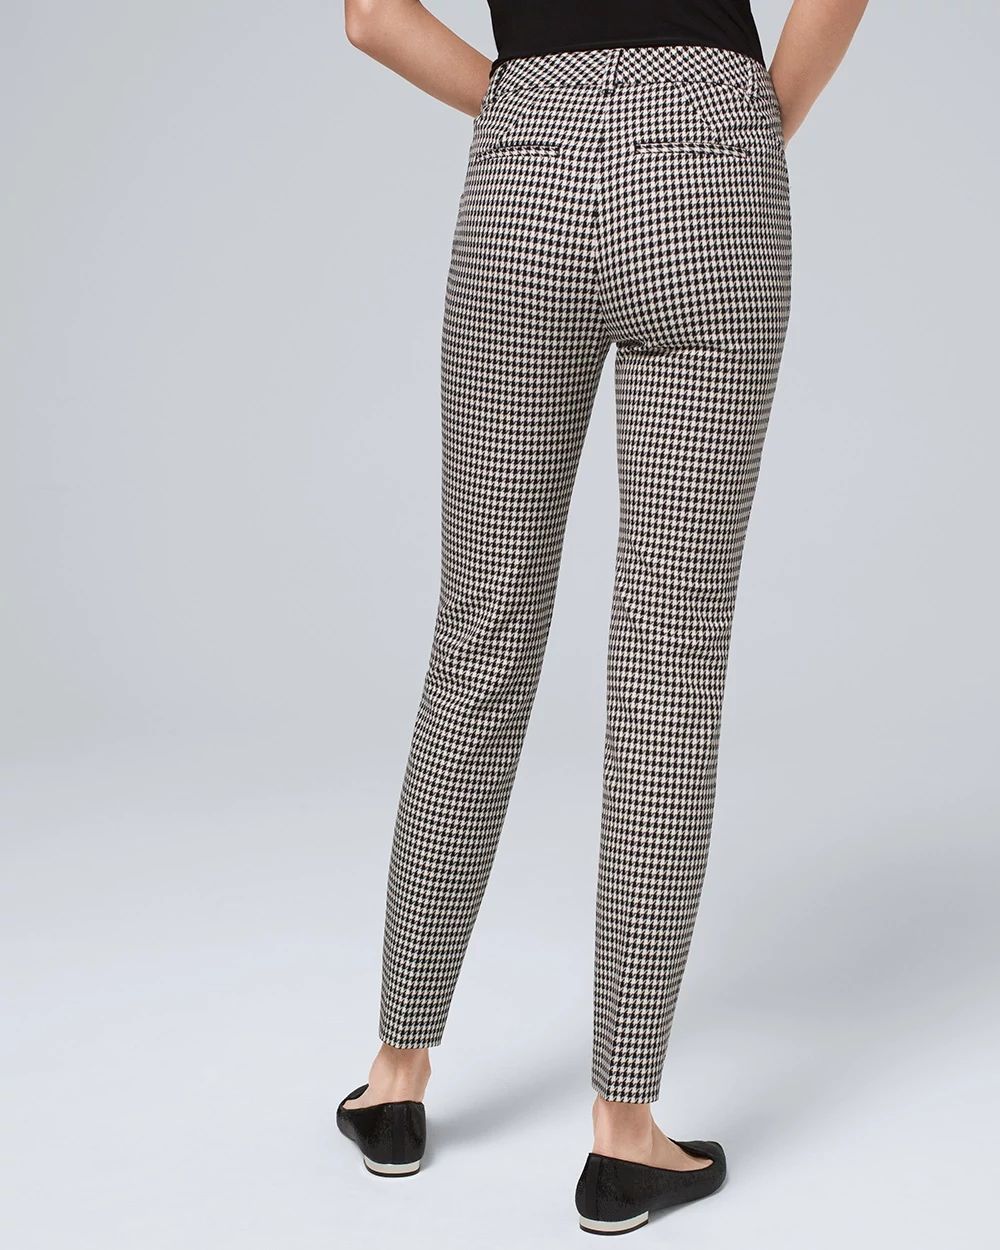 Comfort Stretch Houndstooth Slim Ankle Pants click to view larger image.